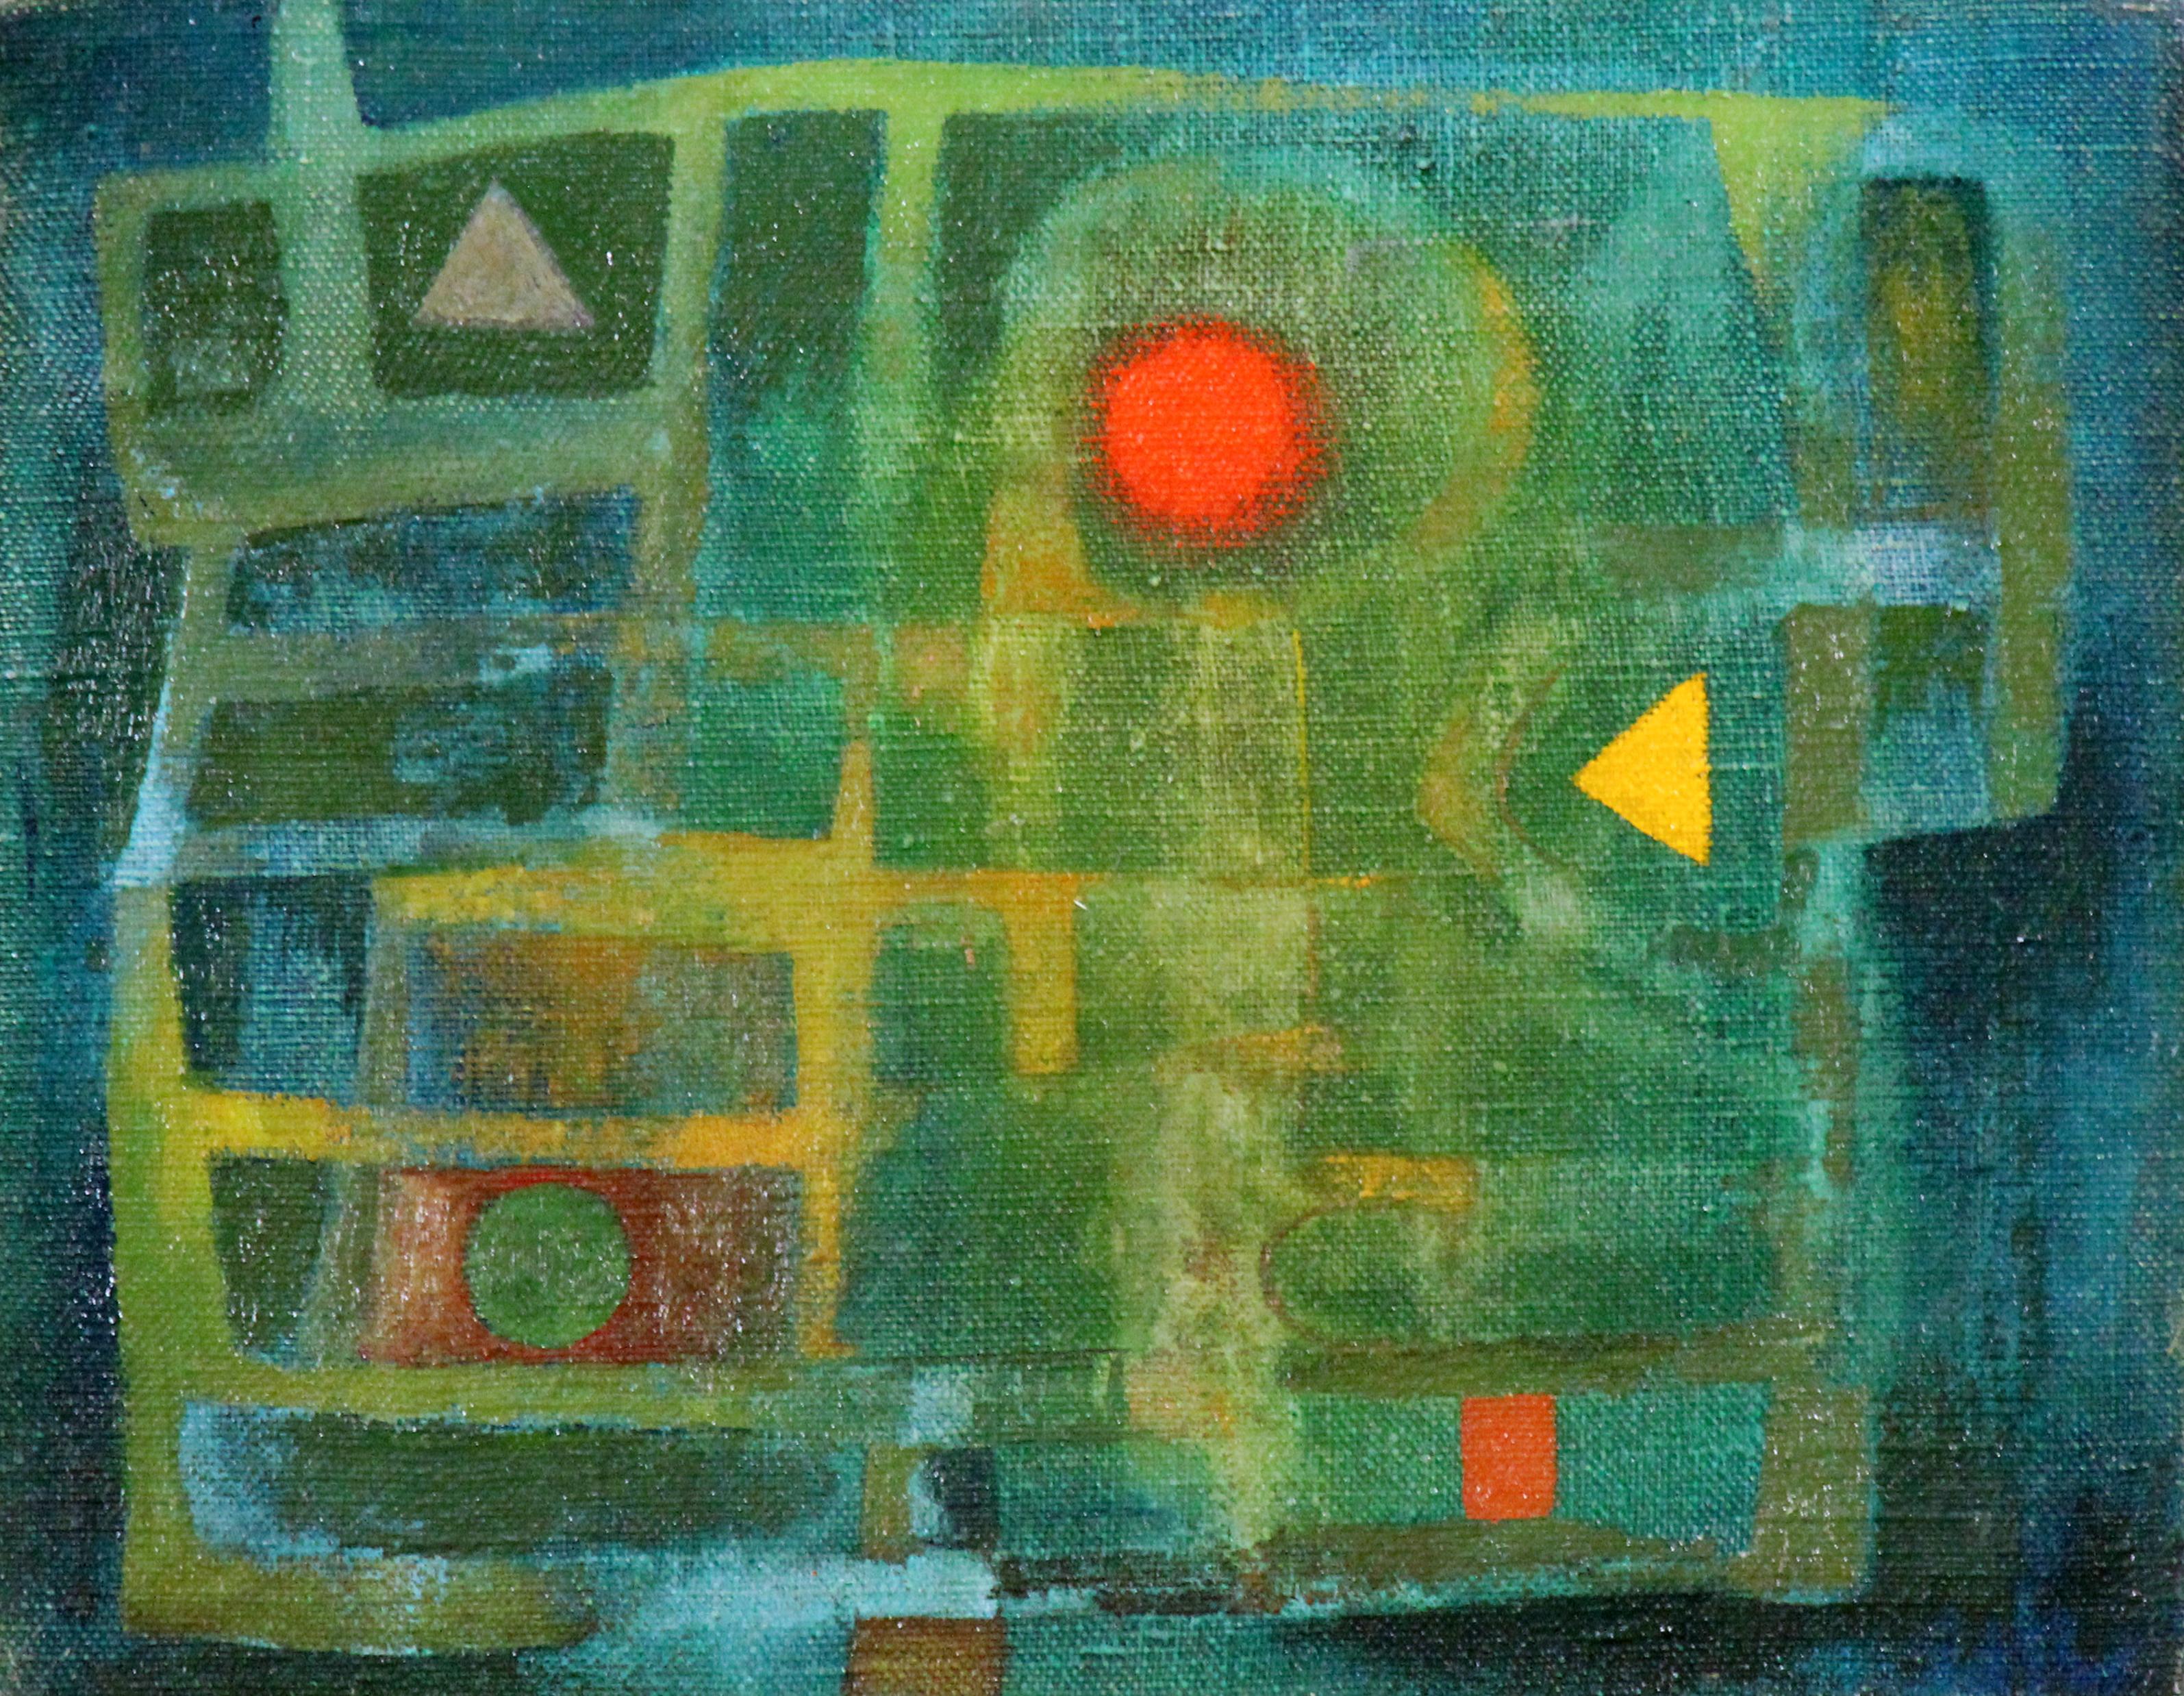 Peter Miller Abstract Painting - Abstract Night Scene by Female American Modernist and Surrealist Artist